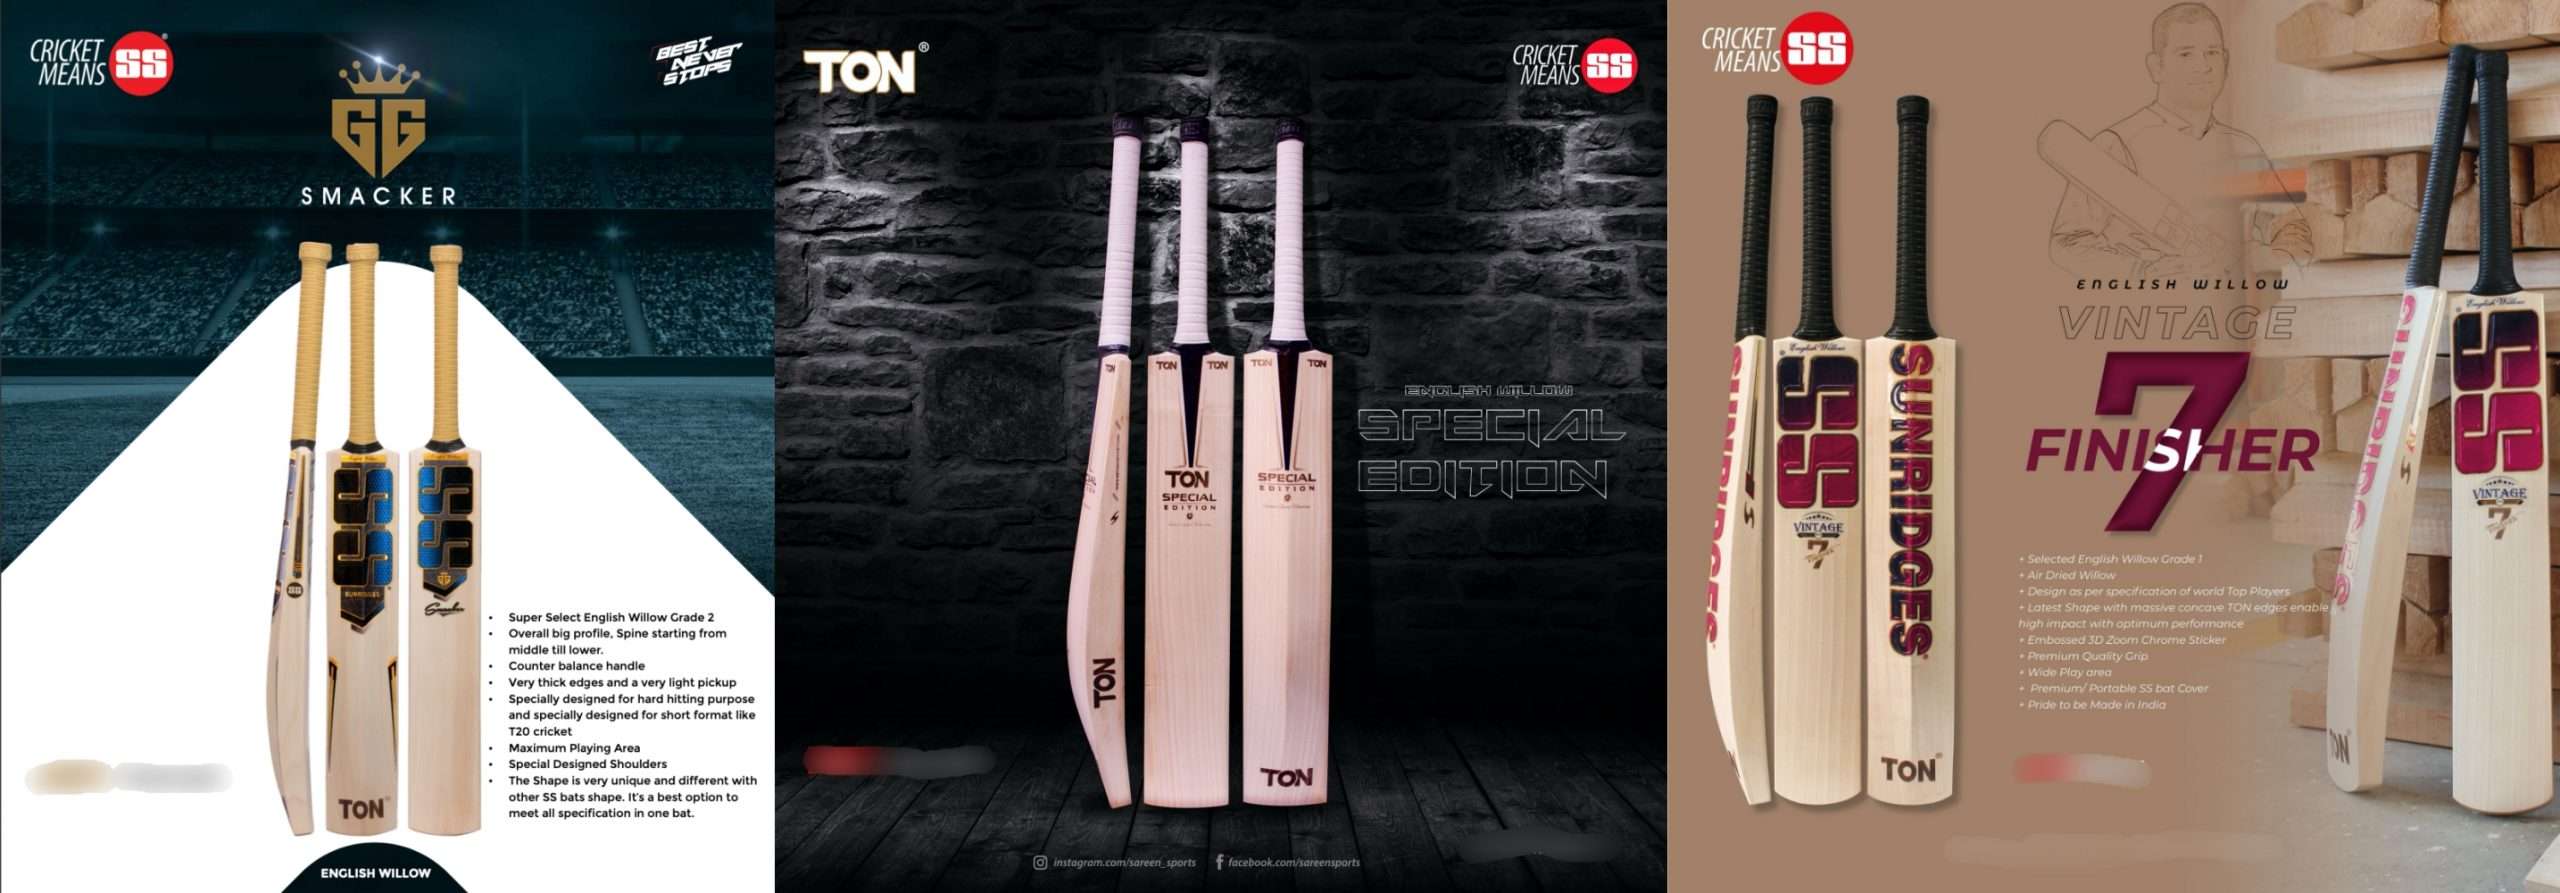 cricket store home